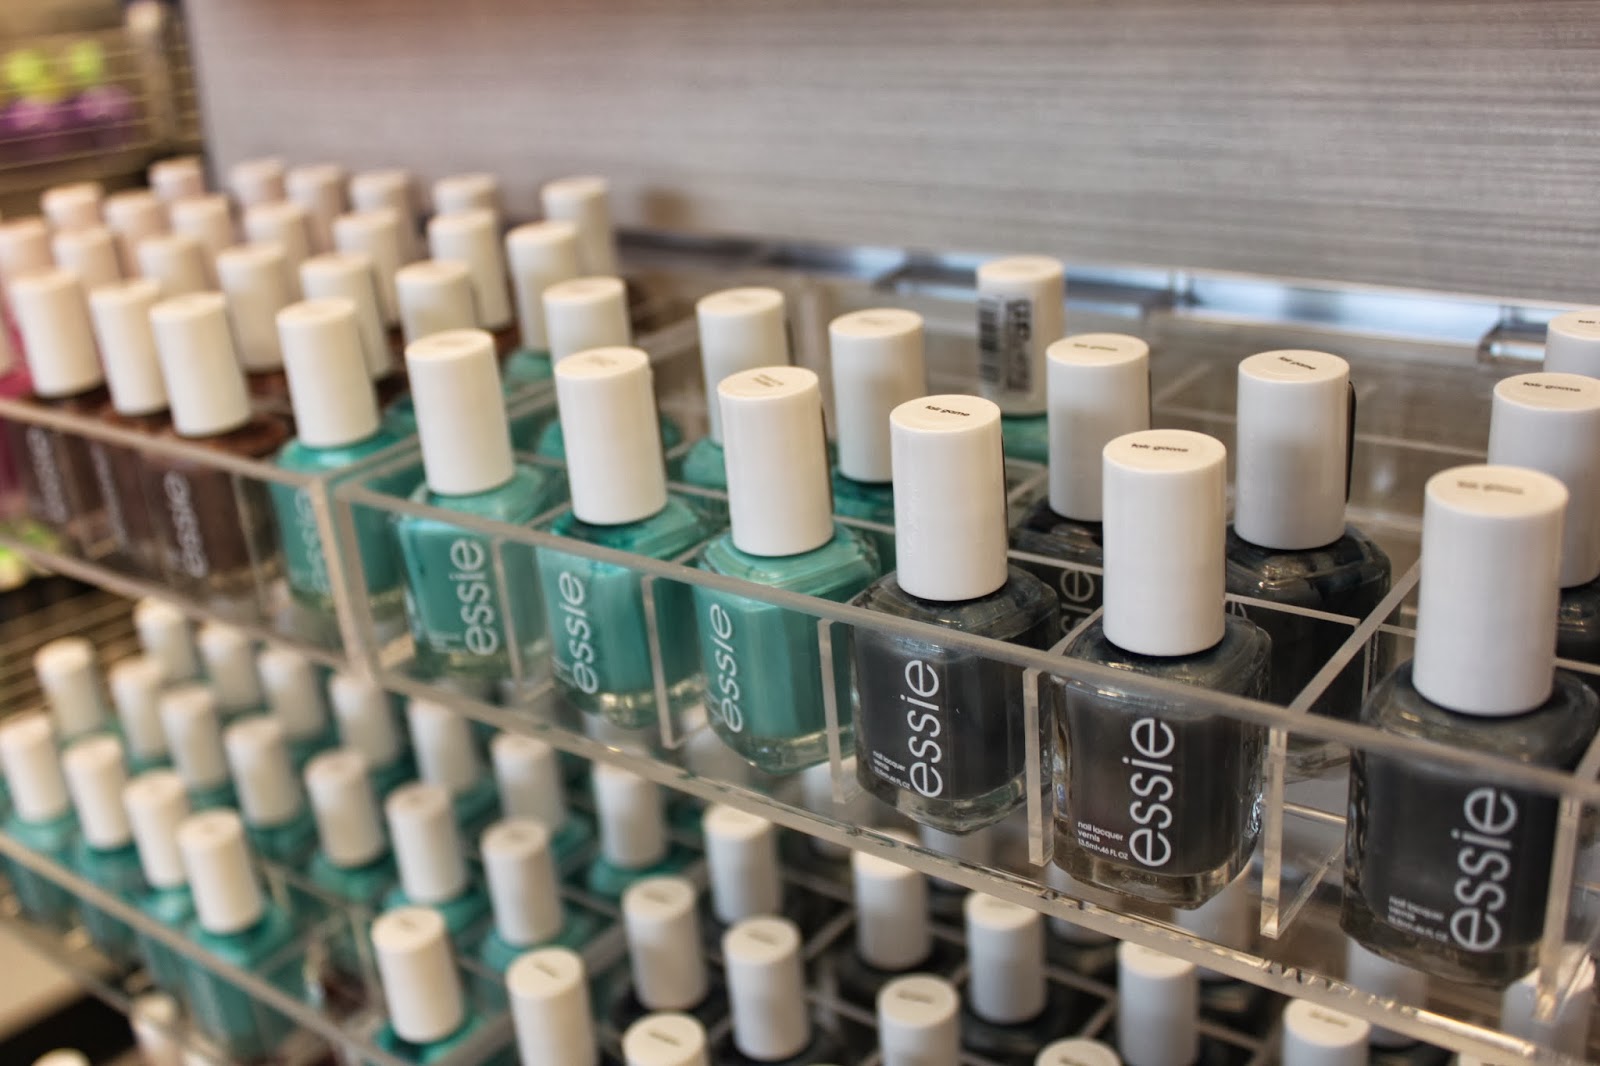 Essie polishes are my favorite, and they had lots of great colors for ...